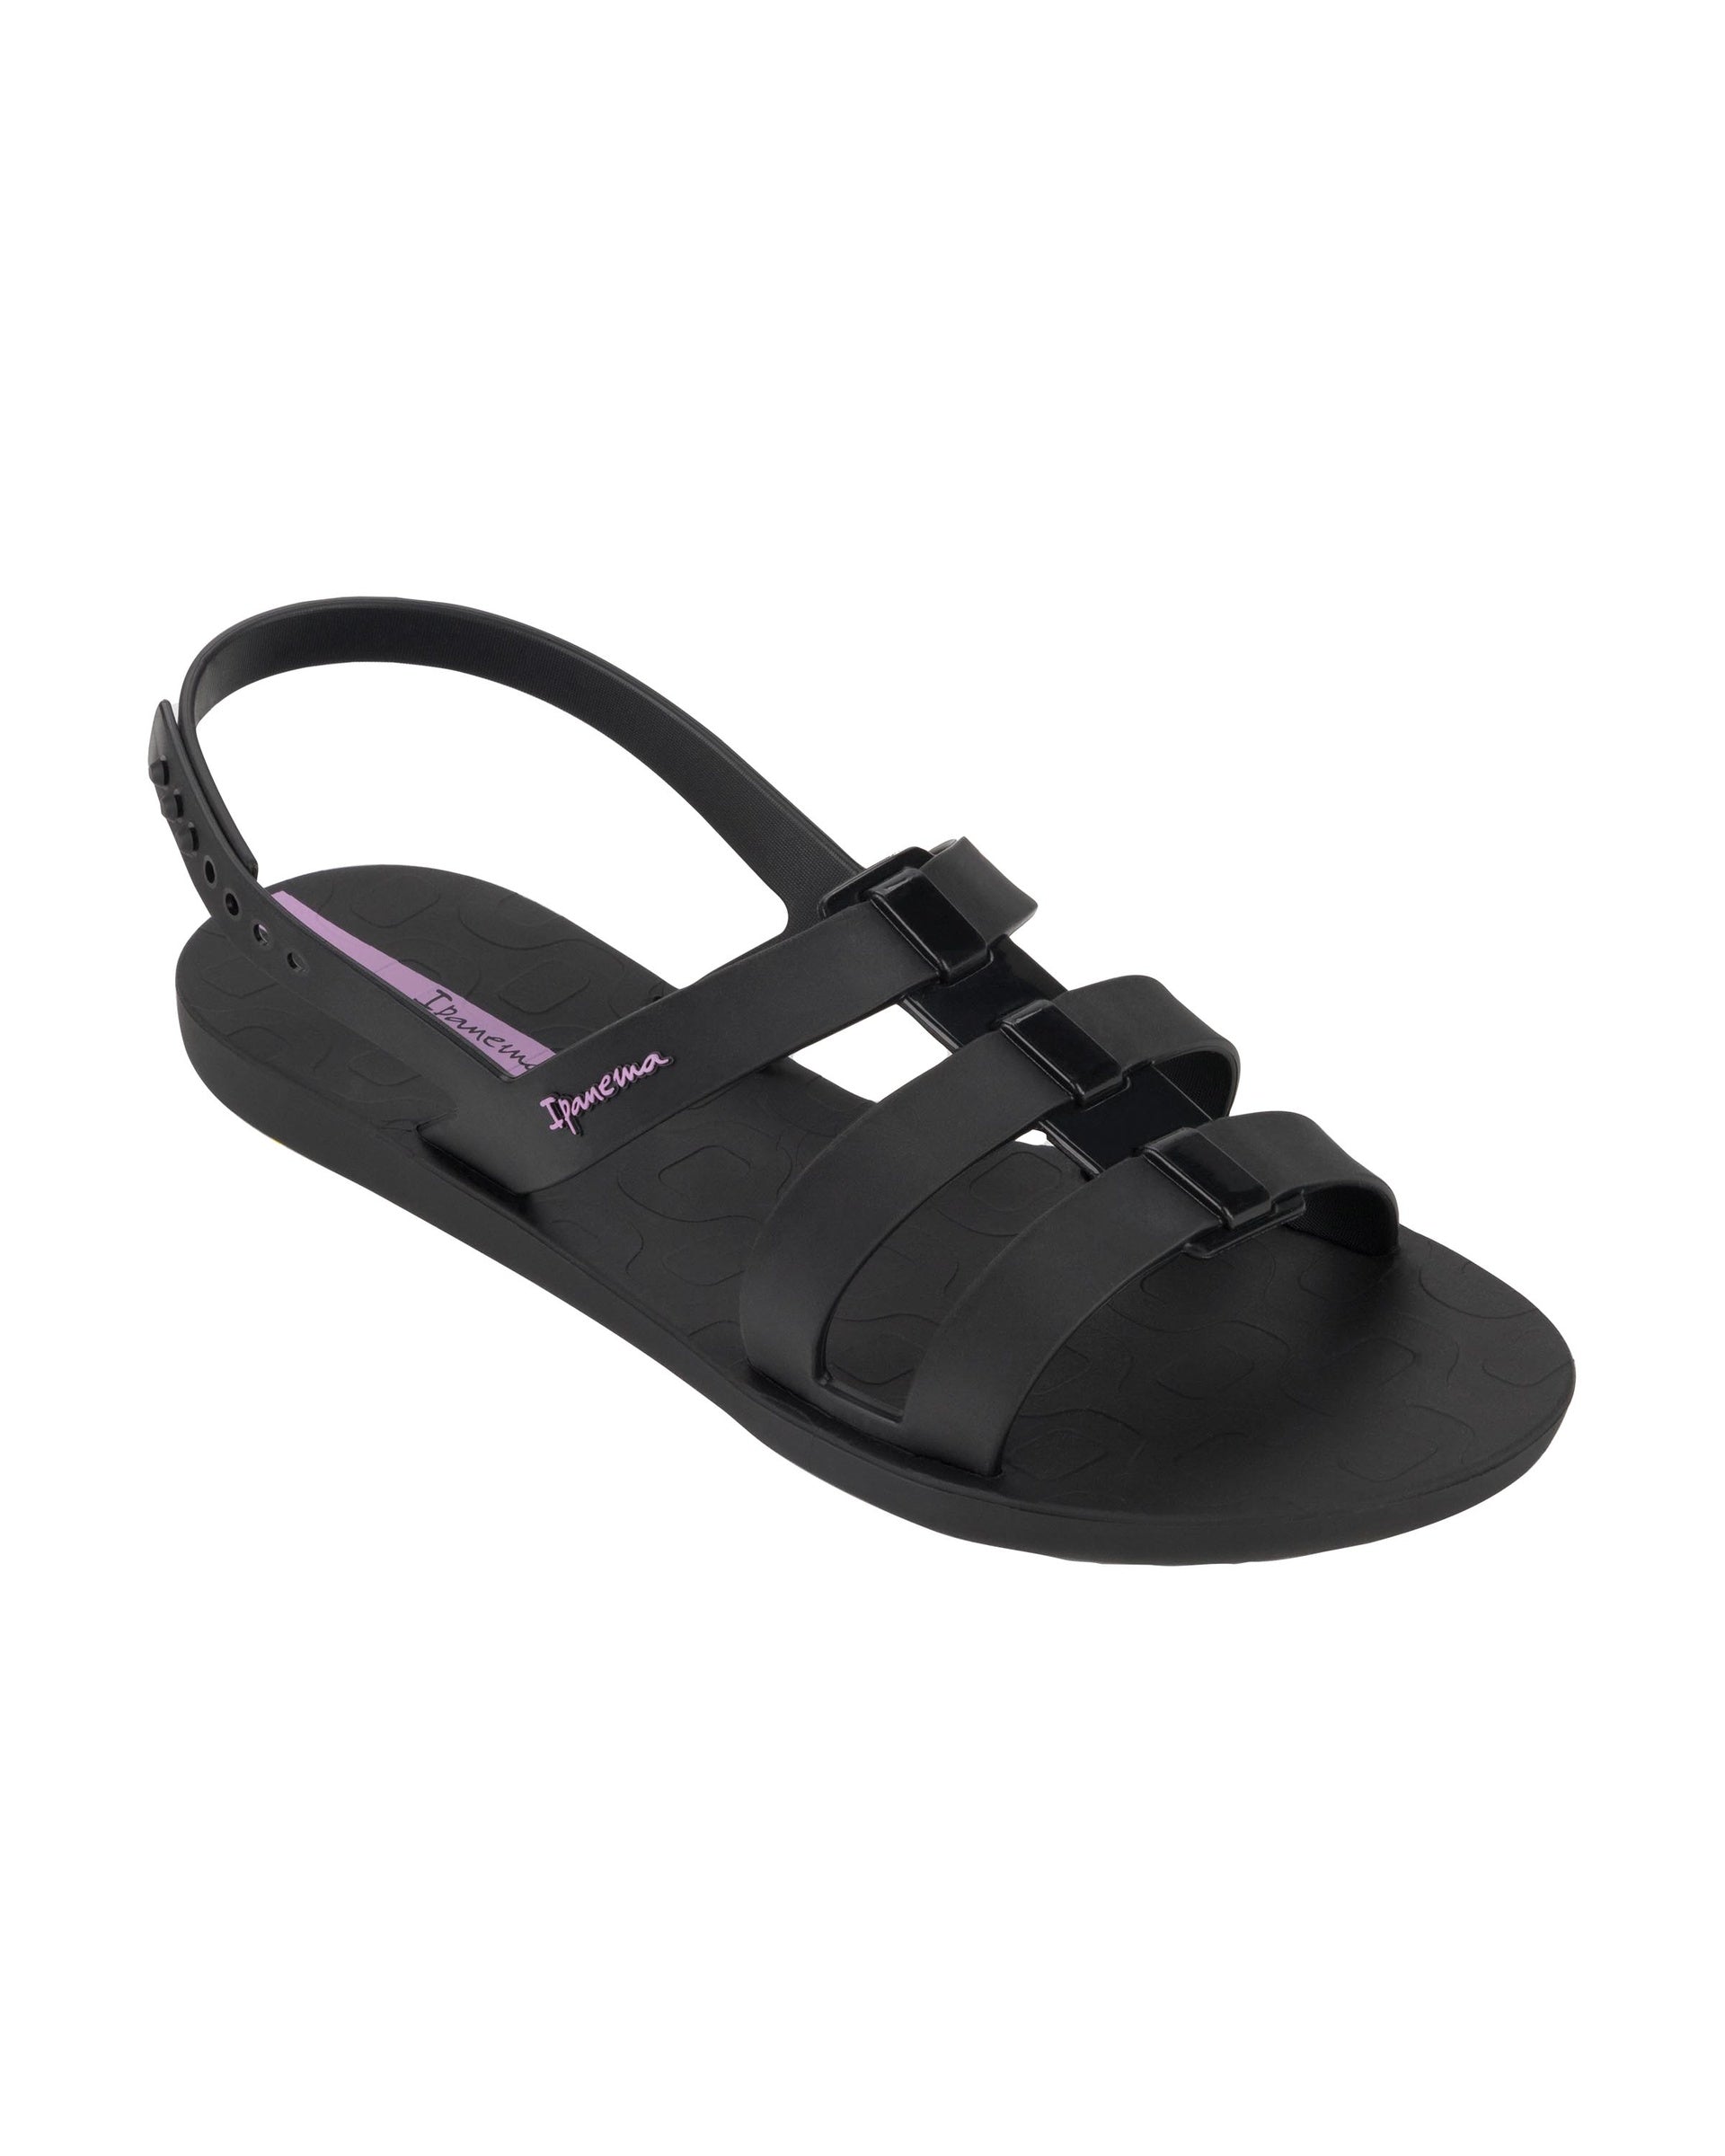 Angled view of a black Ipanema Style women's sandal.